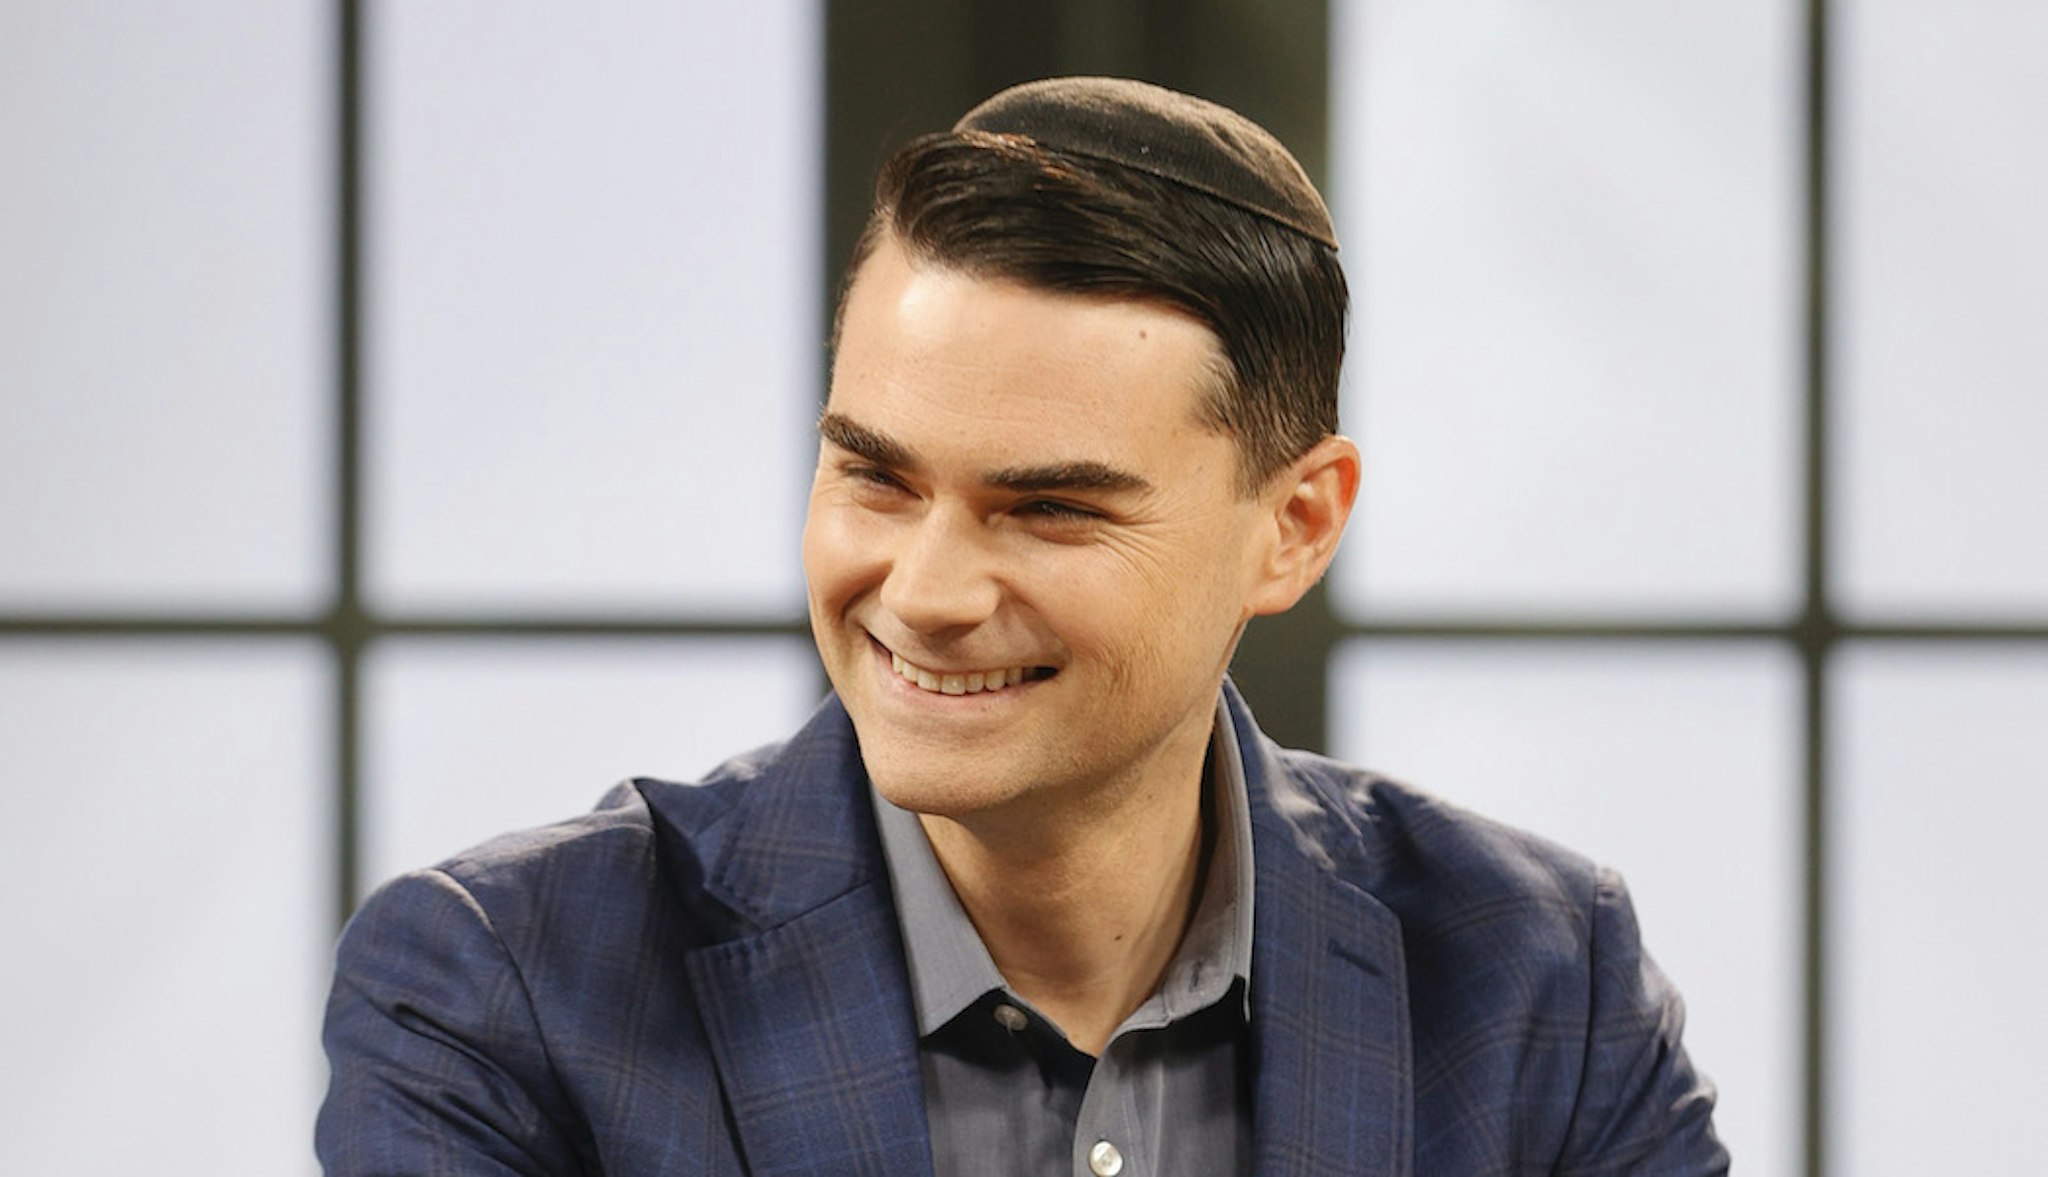 NASHVILLE, TENNESSEE - MARCH 17: American commentator Ben Shapiro is seen on set during a taping of "Candace" on March 17, 2021 in Nashville, Tennessee. The show will air on Friday, March 19, 2021. (Photo by Jason Kempin/Getty Images)